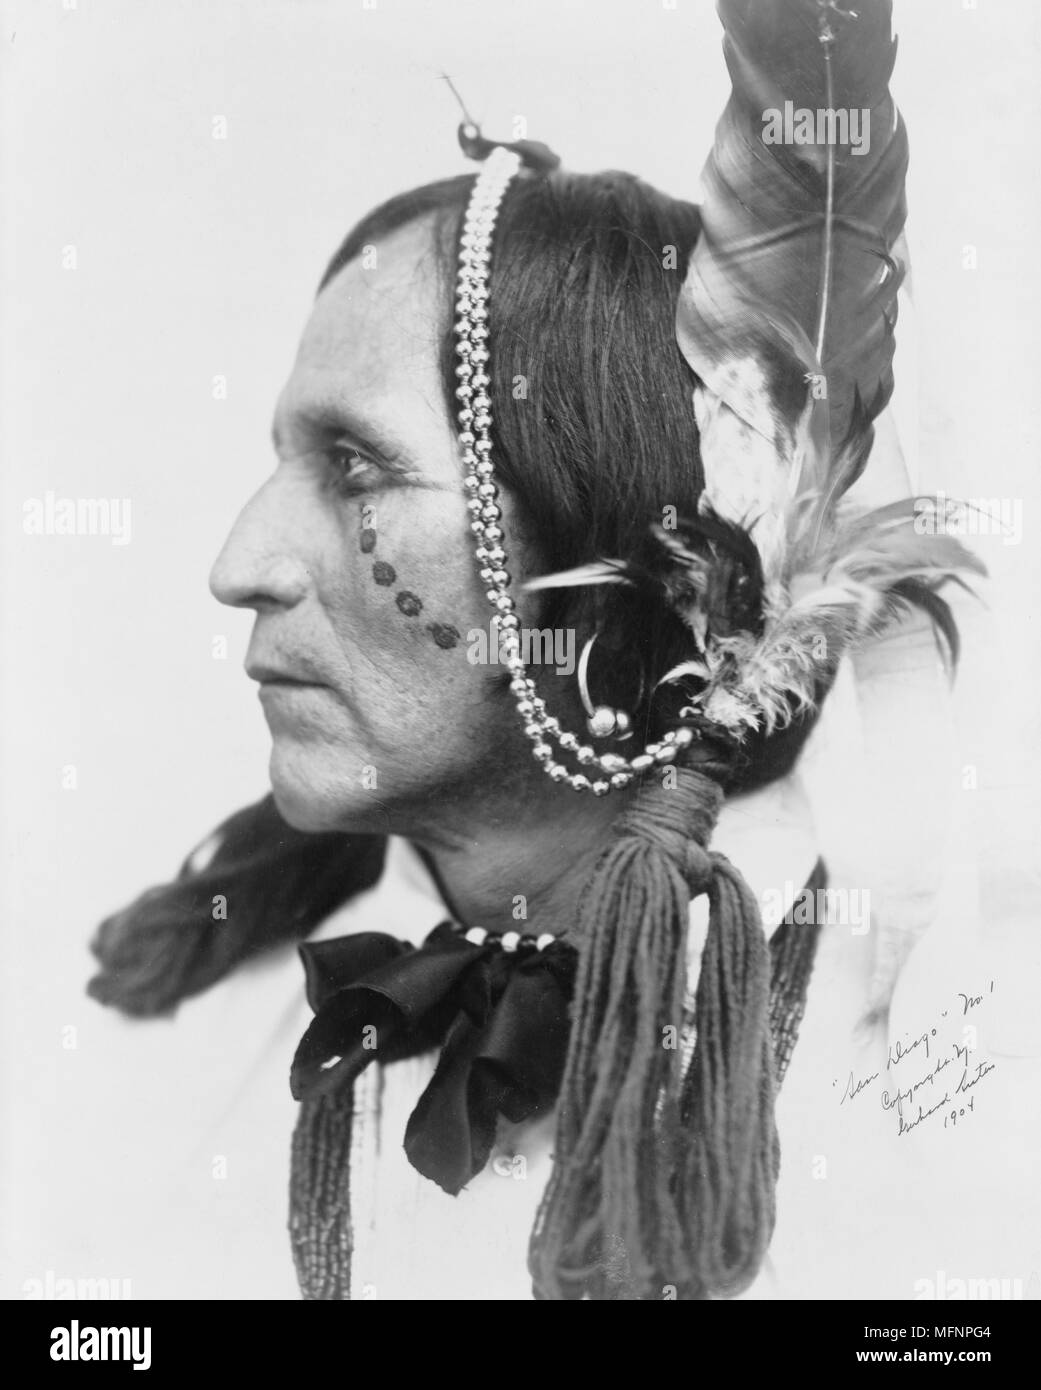 San Diago, Native American, head-and-shoulders portrait, 1905. Photograph by the Gerhard Sisters, Mamie and Emma. Stock Photo